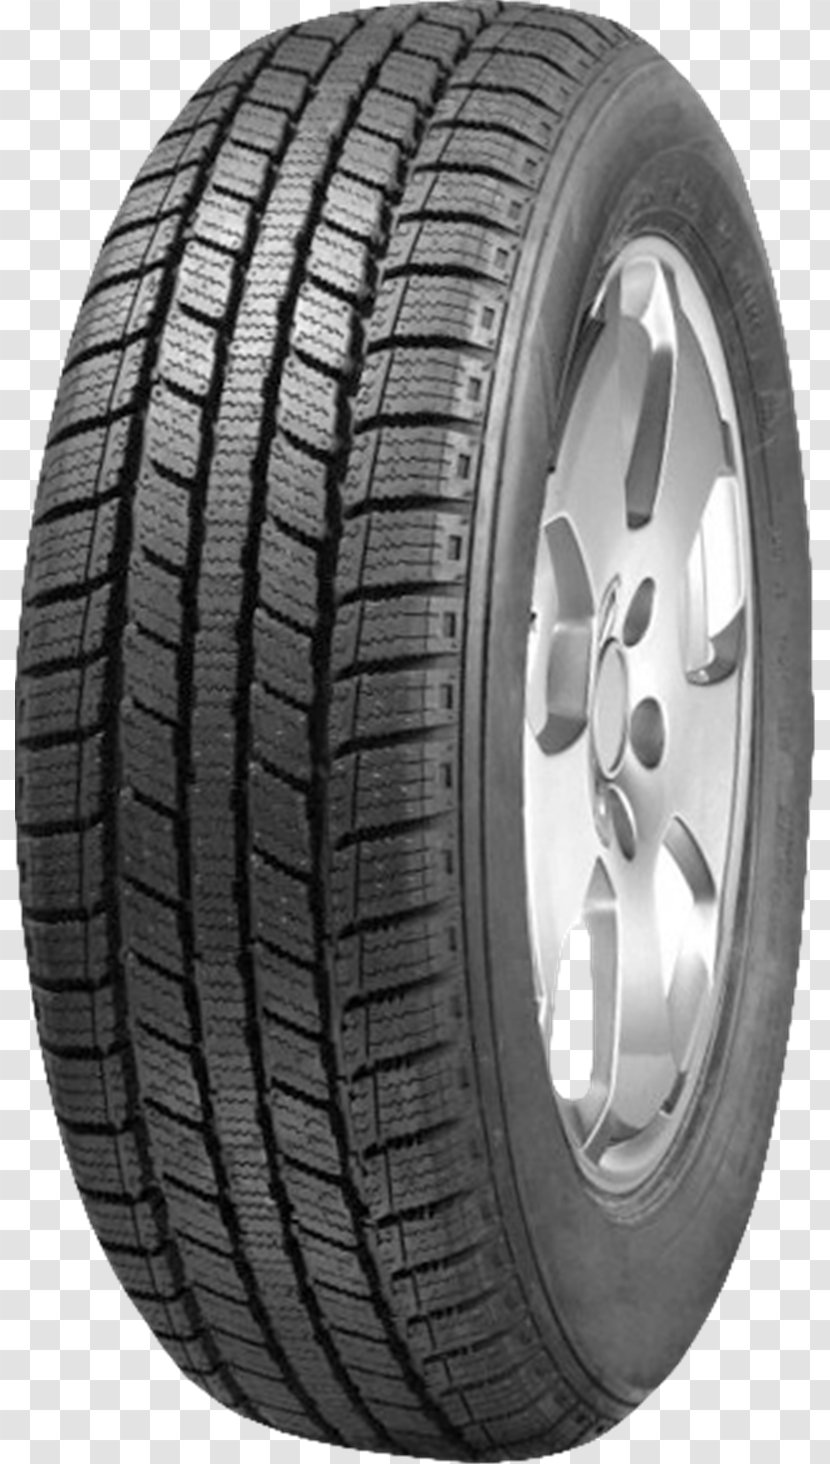 Car Goodyear Tire And Rubber Company Land Rover IOTA - Dunlop Tyres Transparent PNG